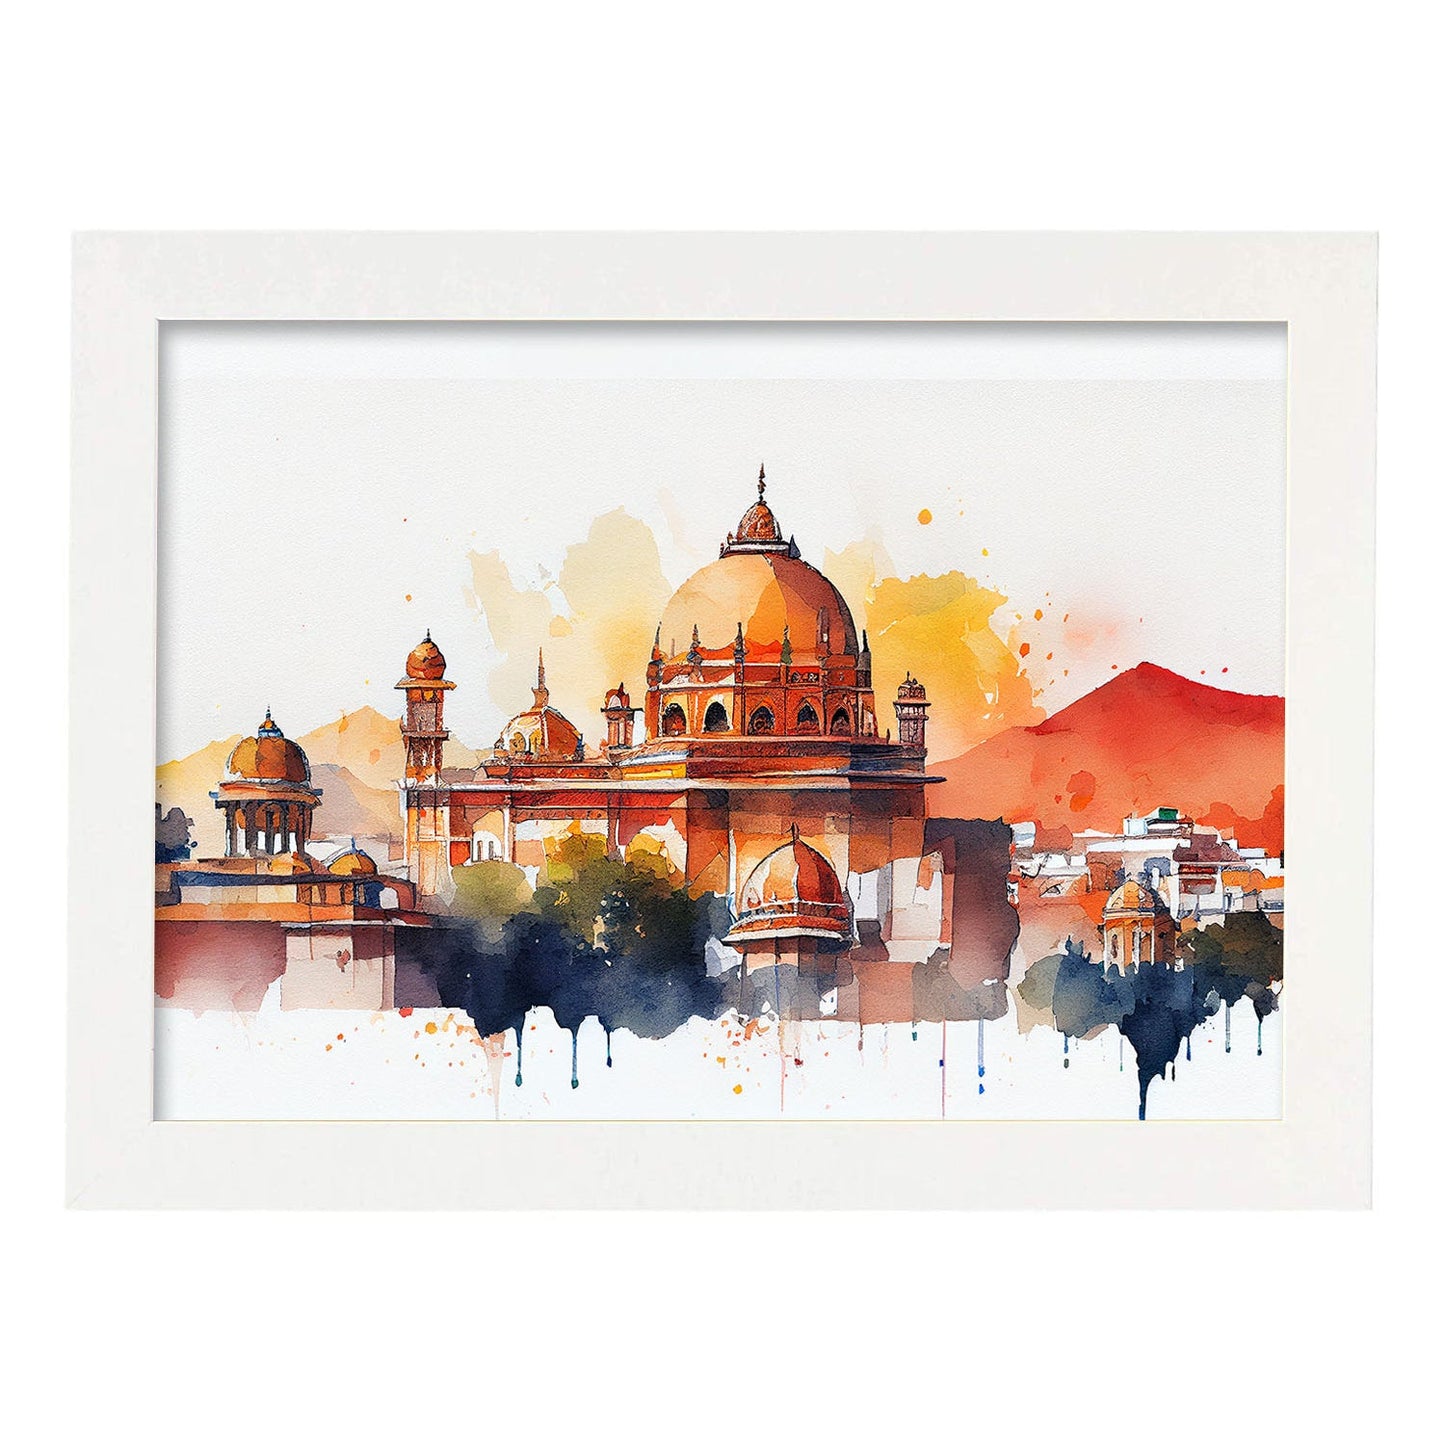 Nacnic watercolor of a skyline of the city of Jaipur. Aesthetic Wall Art Prints for Bedroom or Living Room Design.-Artwork-Nacnic-A4-Marco Blanco-Nacnic Estudio SL